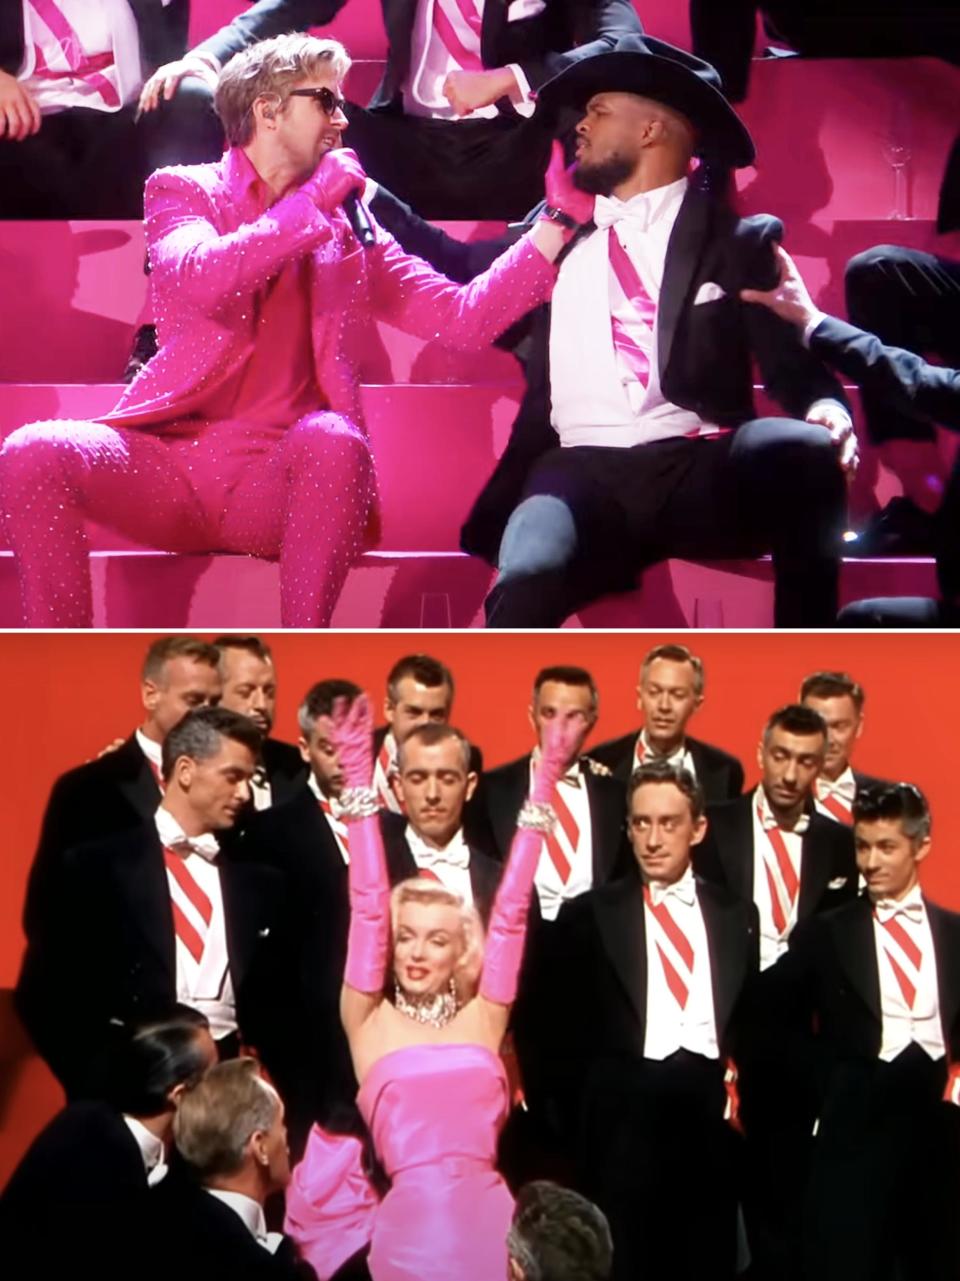 Screenshots from the Oscars and "Gentlemen Prefer Blondes"